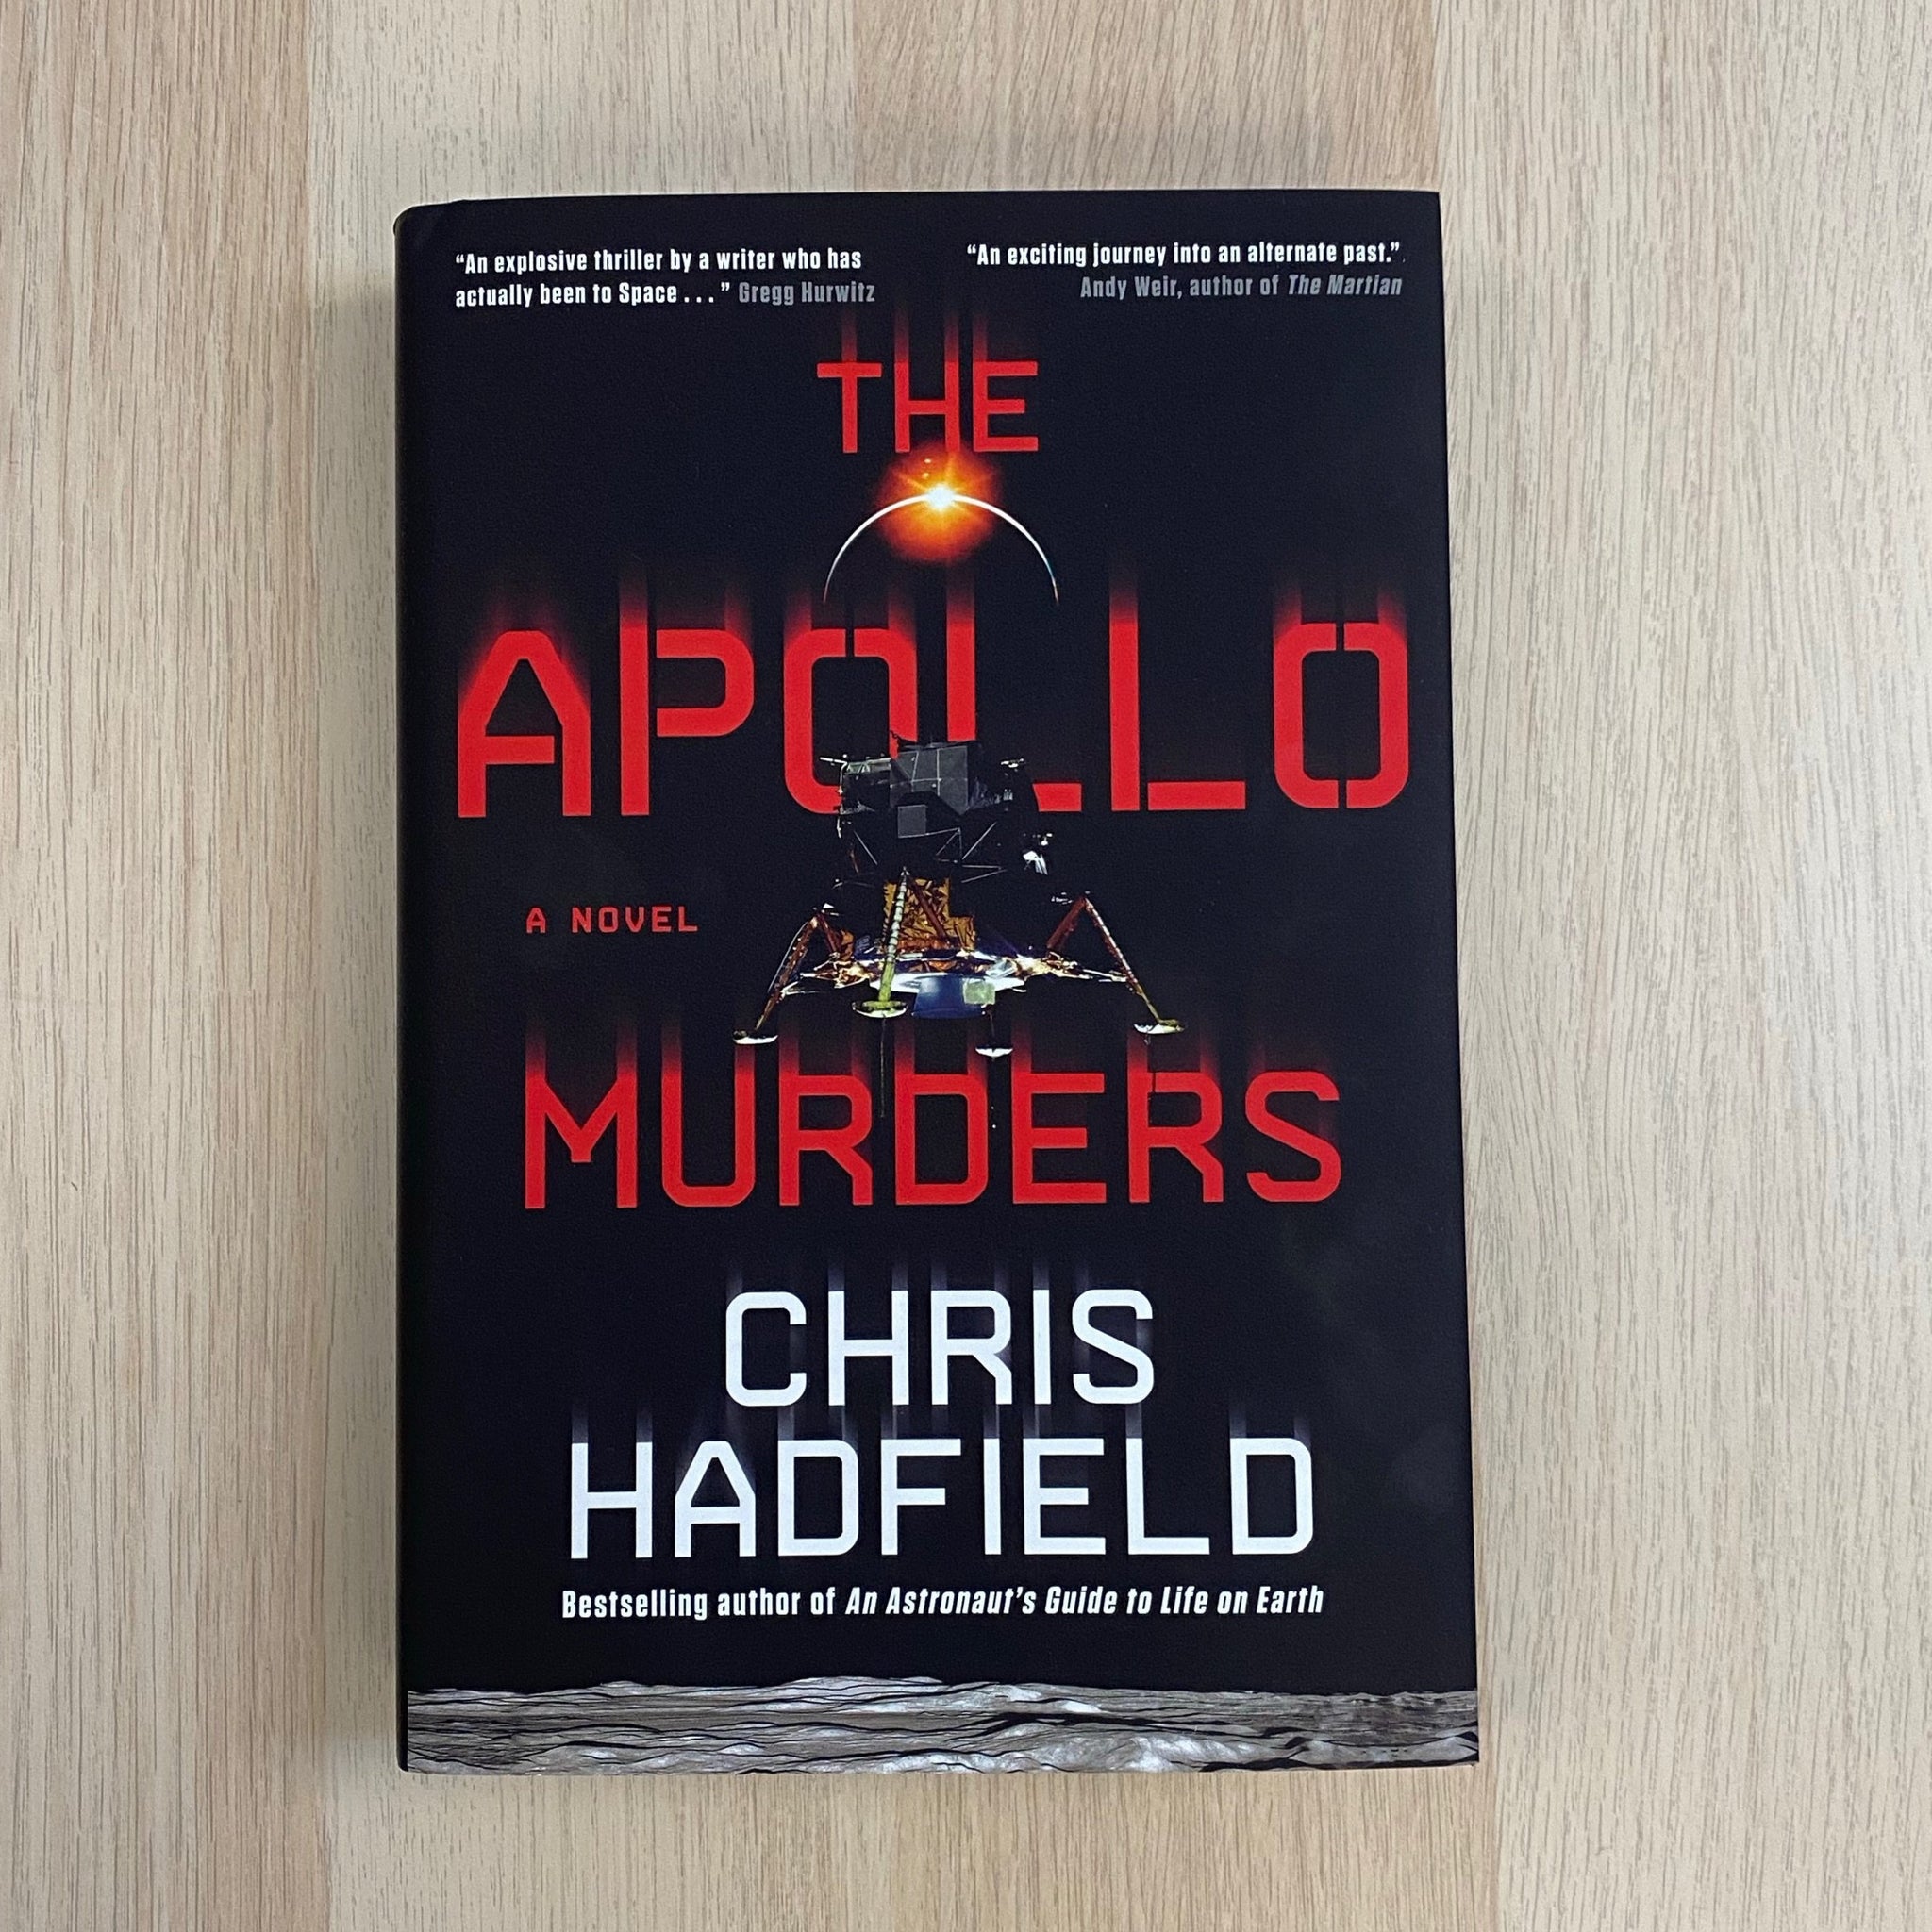 The Apollo Murders (Signed by Chris Hadfield)